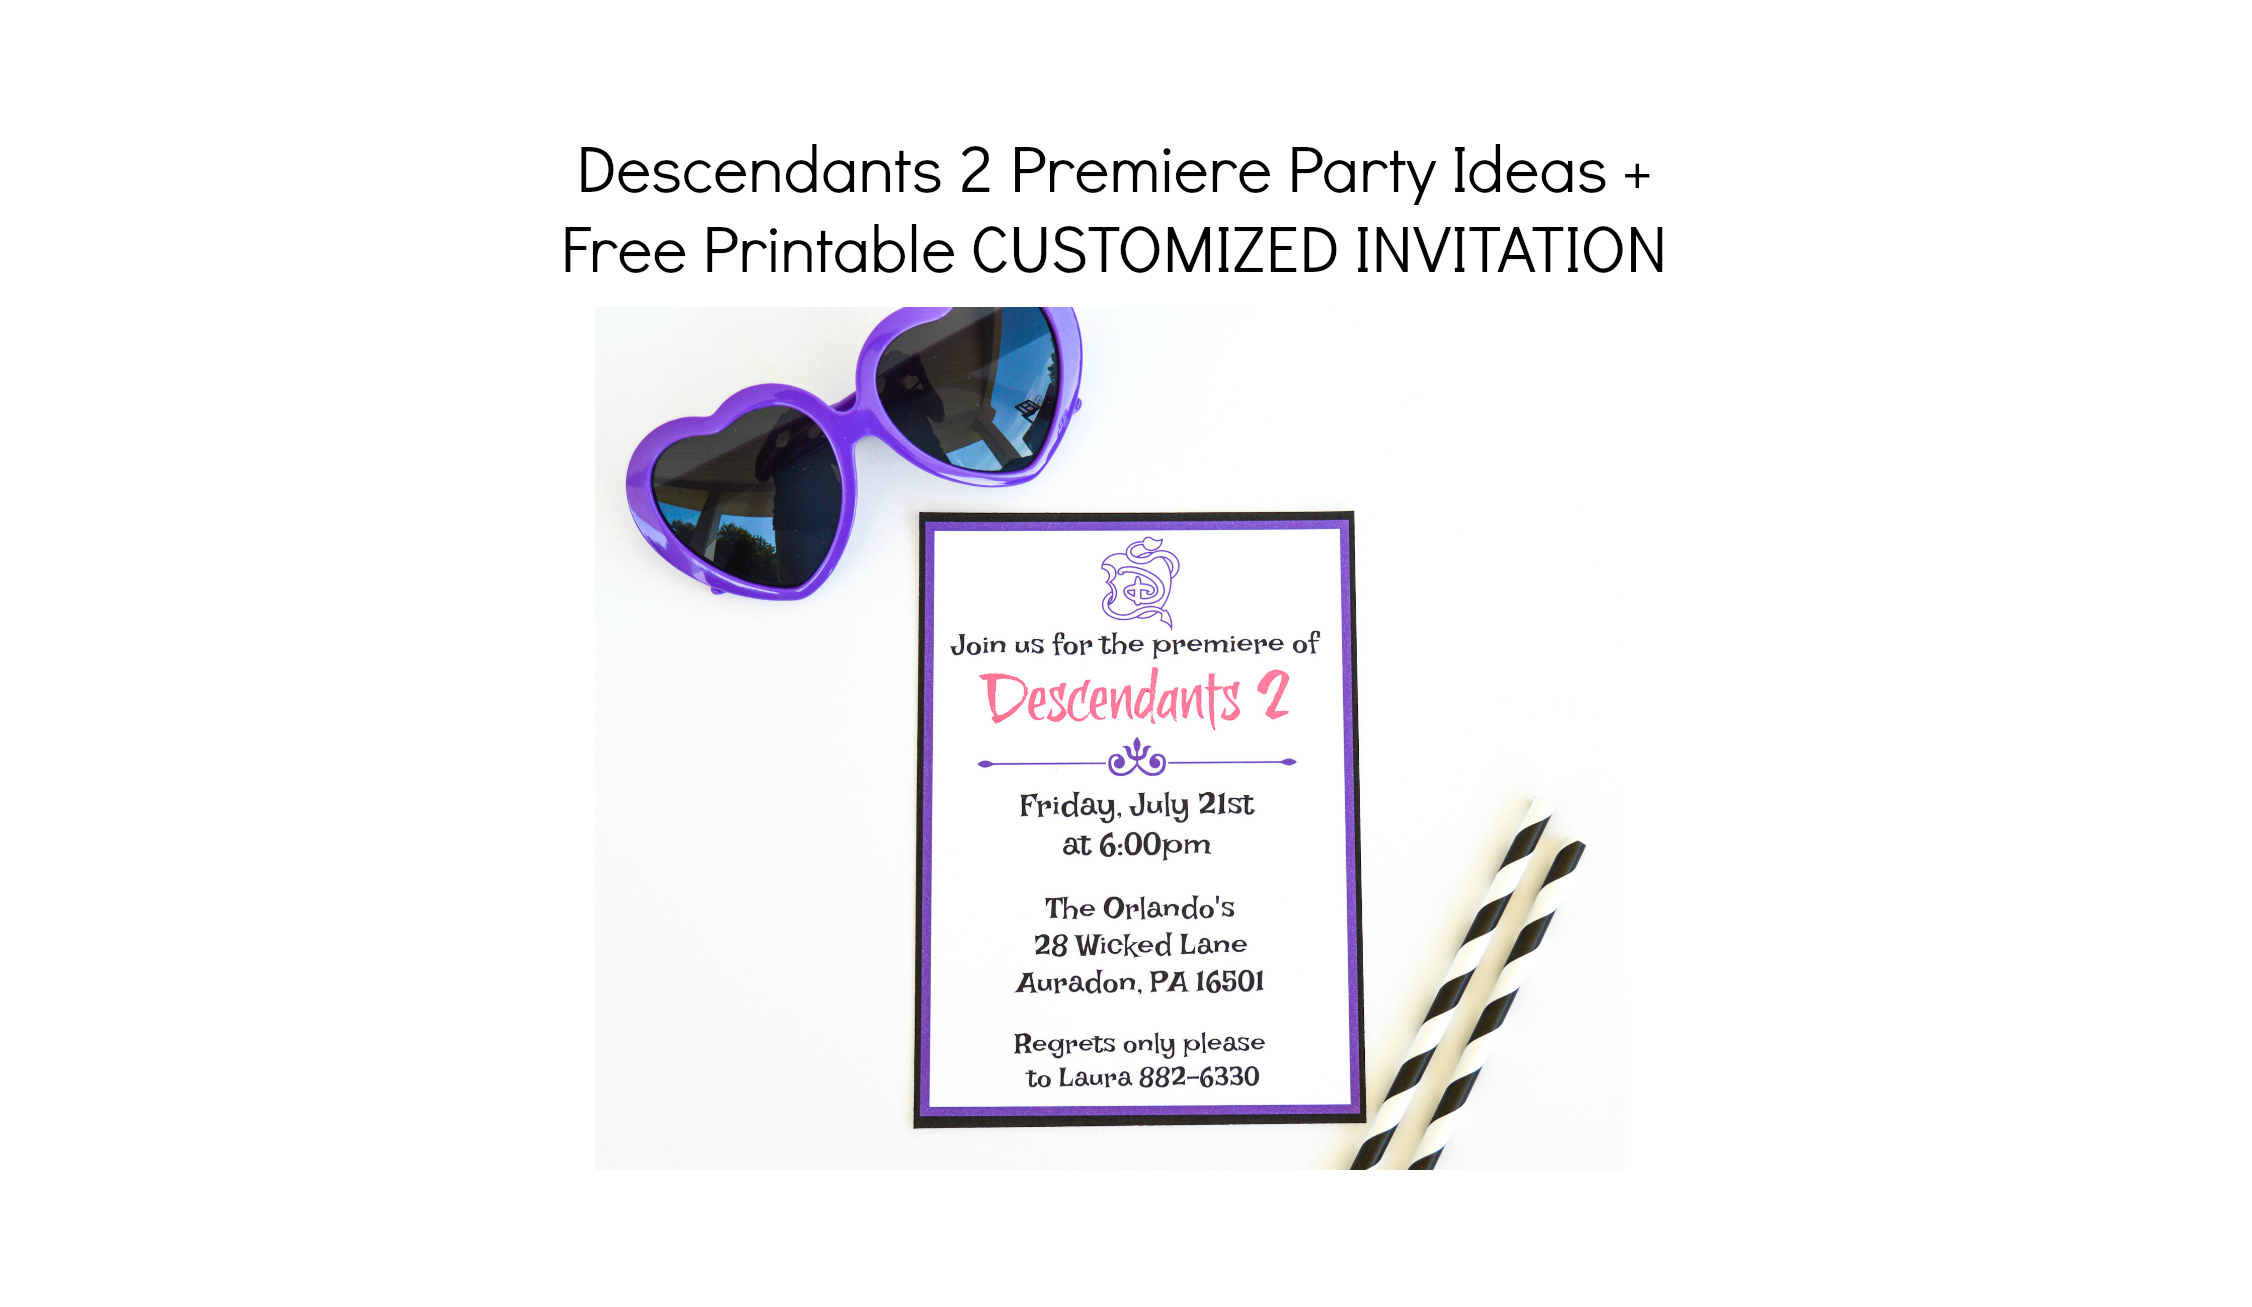 Descendants 2 premiere party ideas from Celebrate In Detail - free printables included.